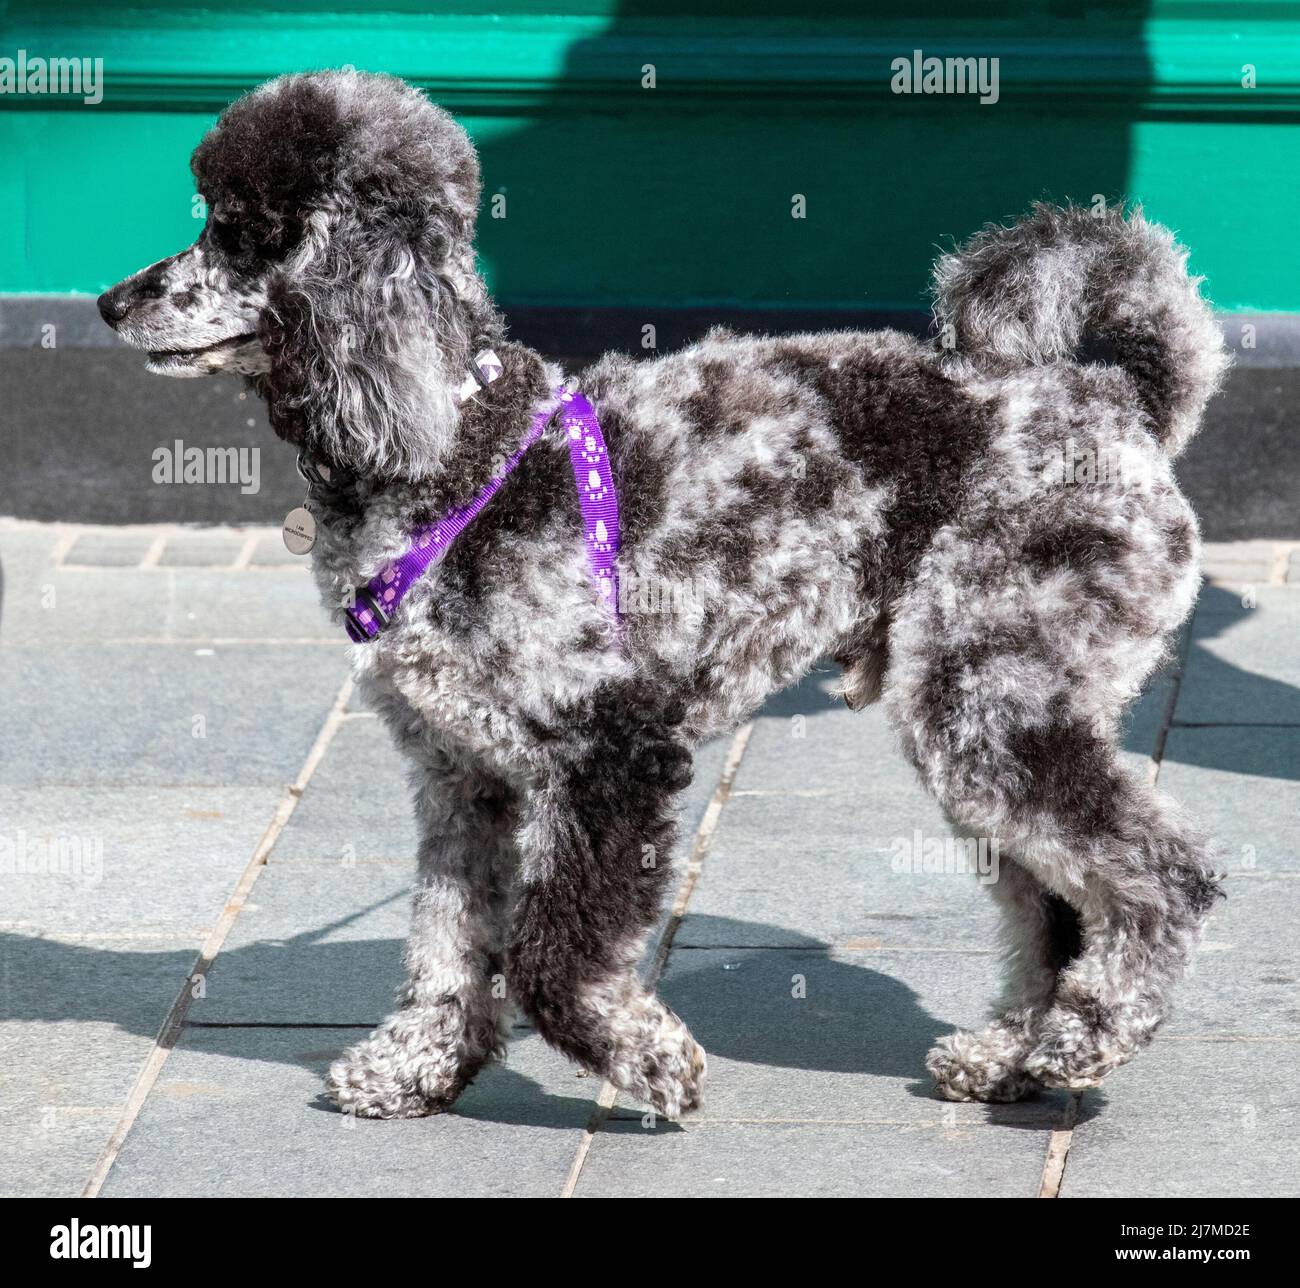 Southport, Merseyside.  UK Weather. 10 May 2022. LUDO a blue Merle Poodle struts his stuff on a sunny day in Southport.  This 18 month old speckled pet pooch costing originaly £2,500 was bought from a breeder in Sheffield and is a one off from a litter of five. A merle is a poodle that has a patterned coat with patches. Merle poodles have a solid base colored coat with a pattern on top of a solid color coat, something a little bit like the pattern patches that you might see on a leopard`s coat.  Credit: MediaWorldImages/AlamyLiveNews Stock Photo